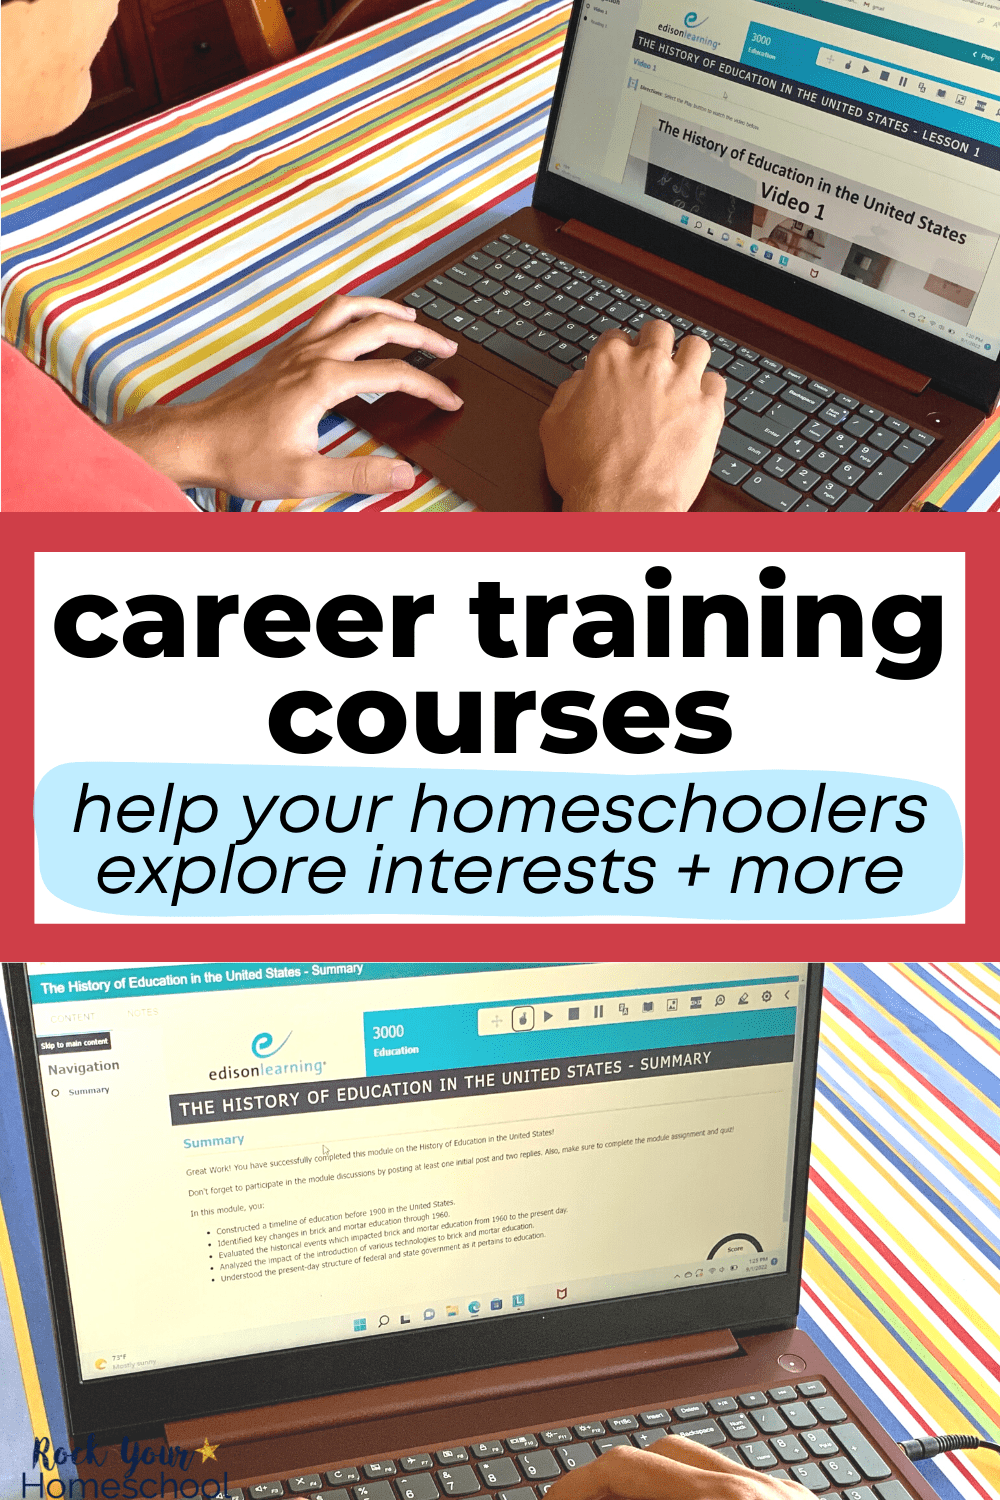 How This Homeschool Career Training Course Helps Your Students Explore Interests & More